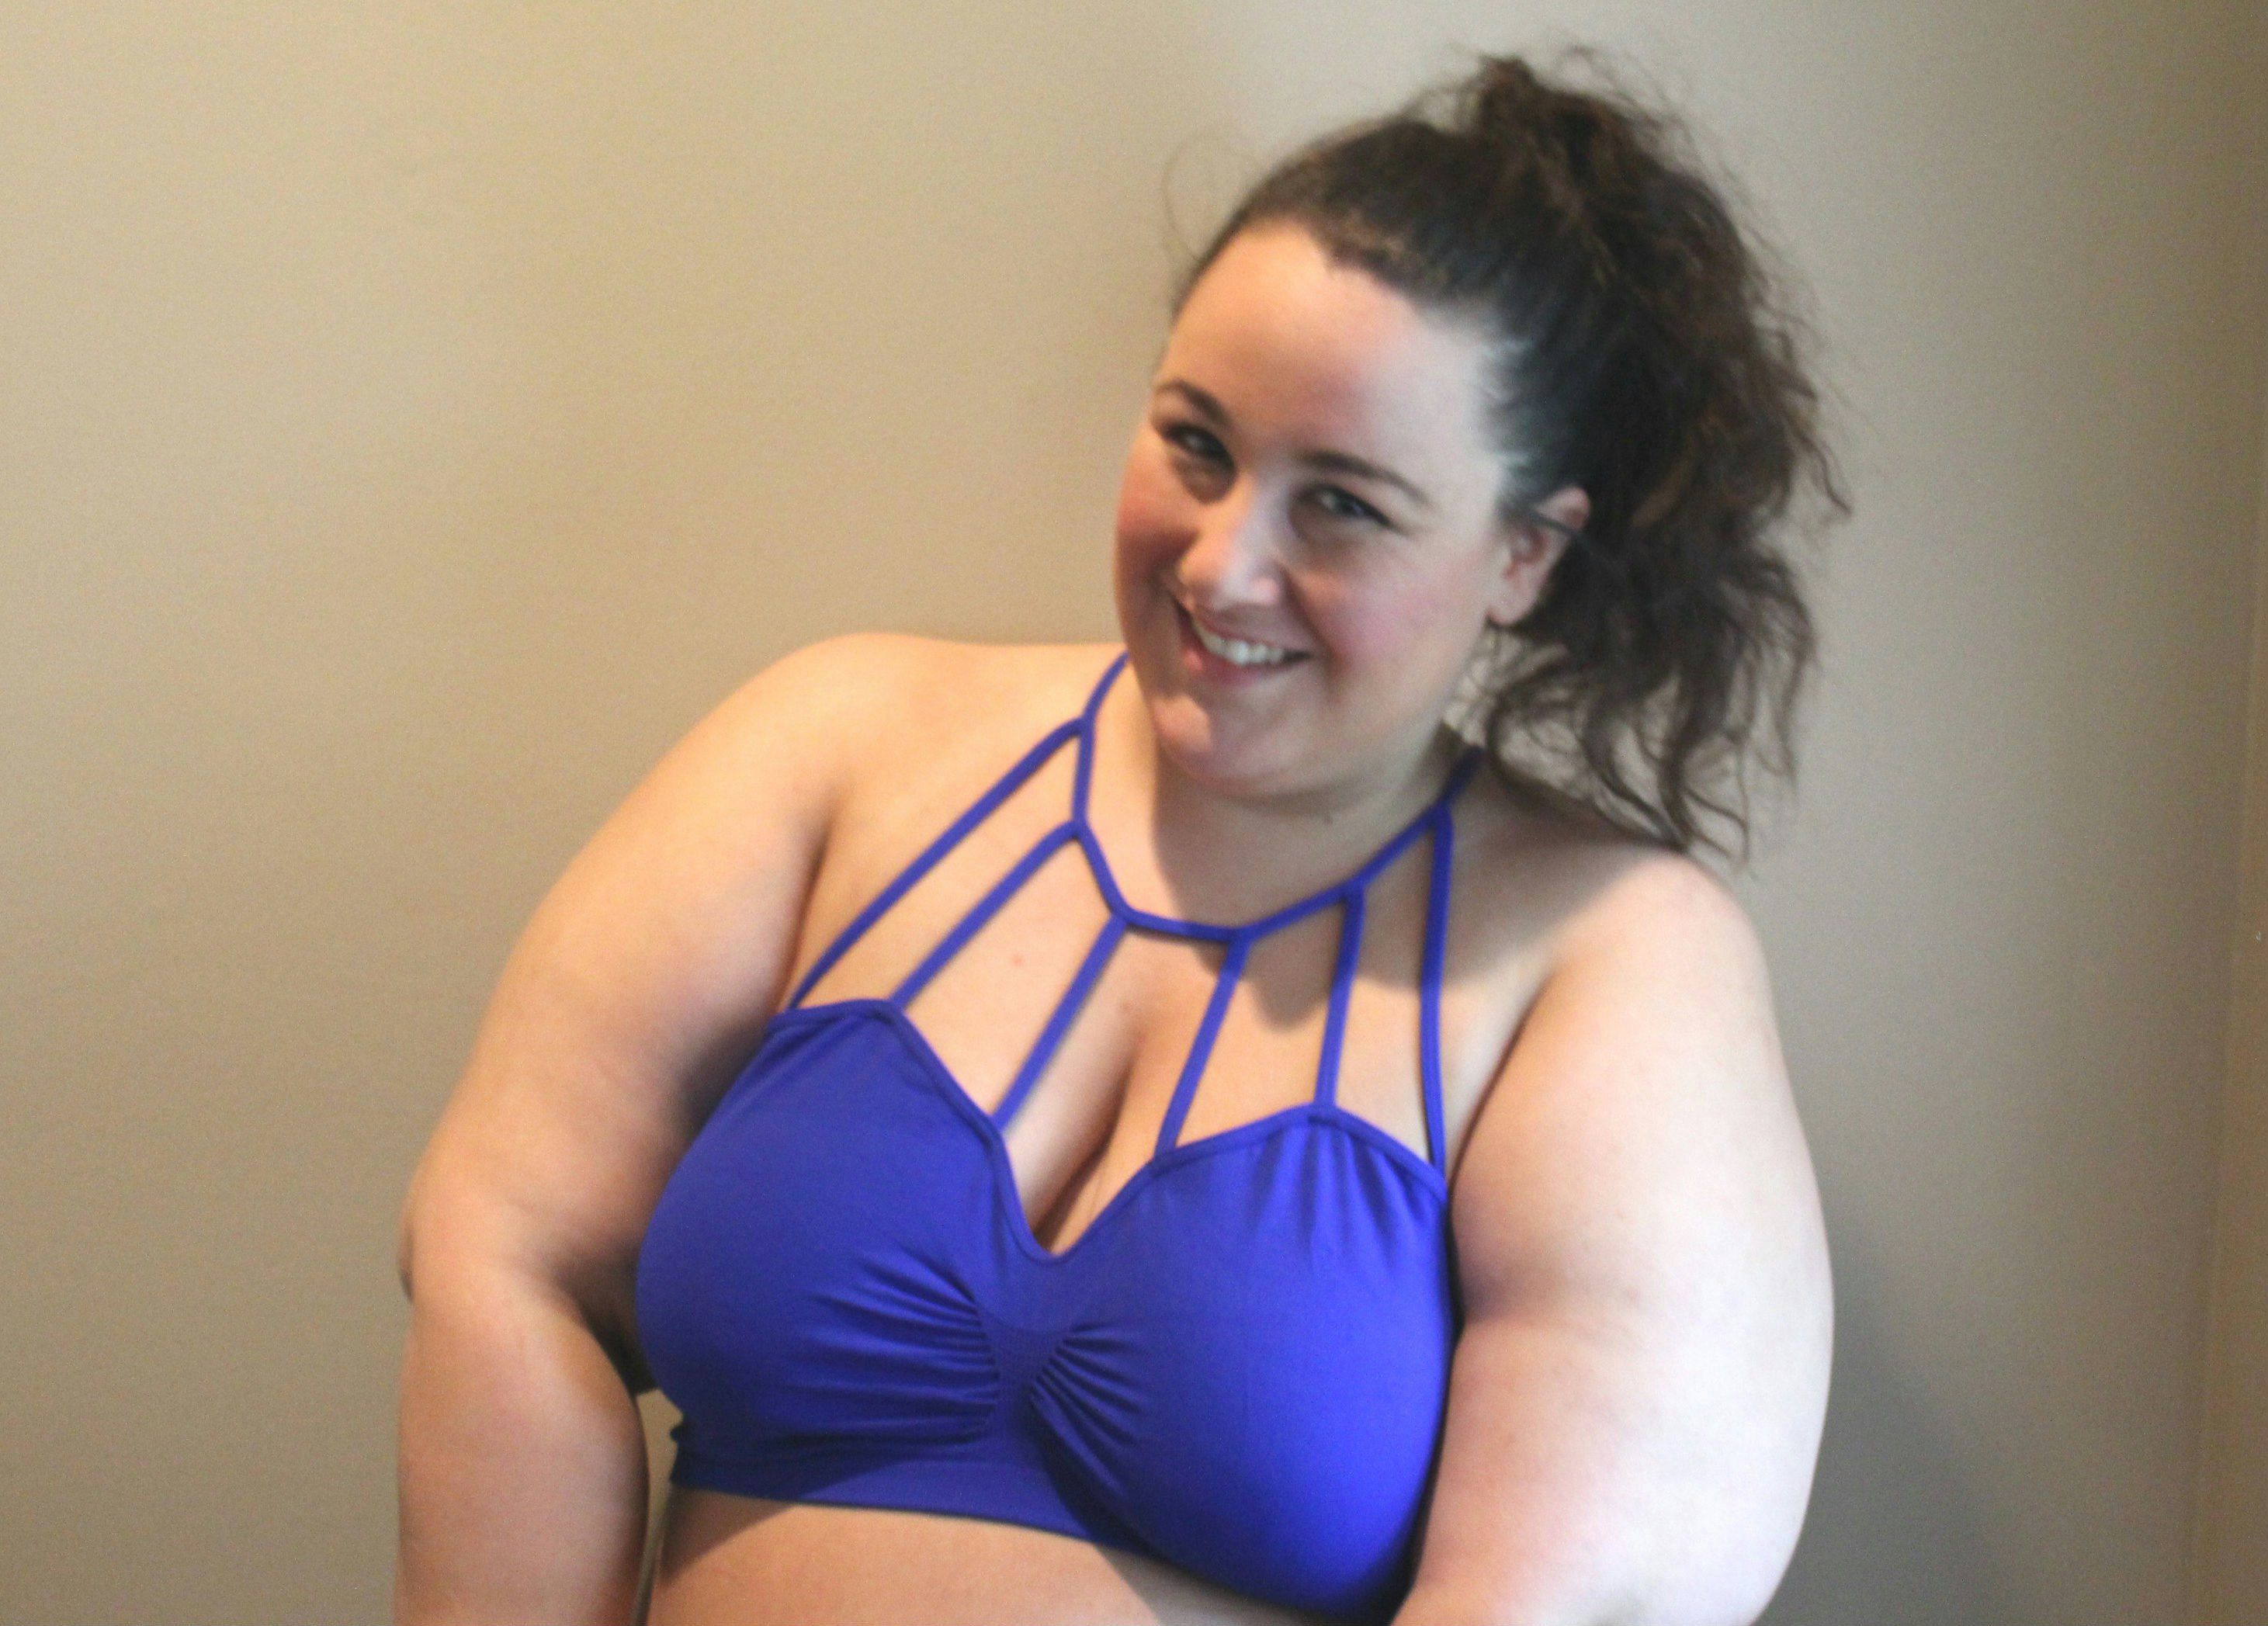 I Tested 7 Plus Size Bralettes & This Is What Happened — PHOTOS